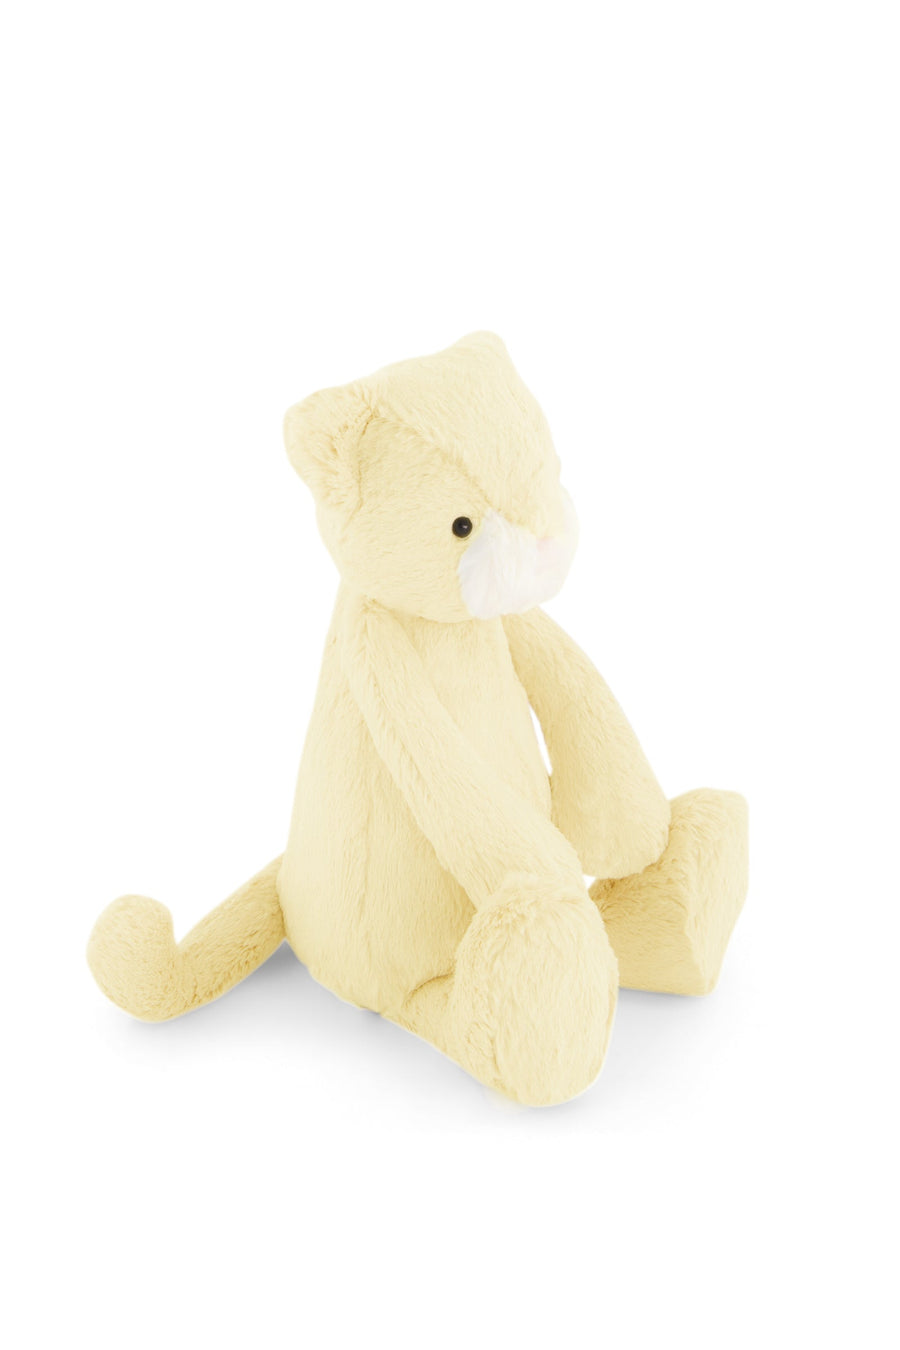 Snuggle Bunnies - Elsie the Kitty - Anise Childrens Toy from Jamie Kay NZ